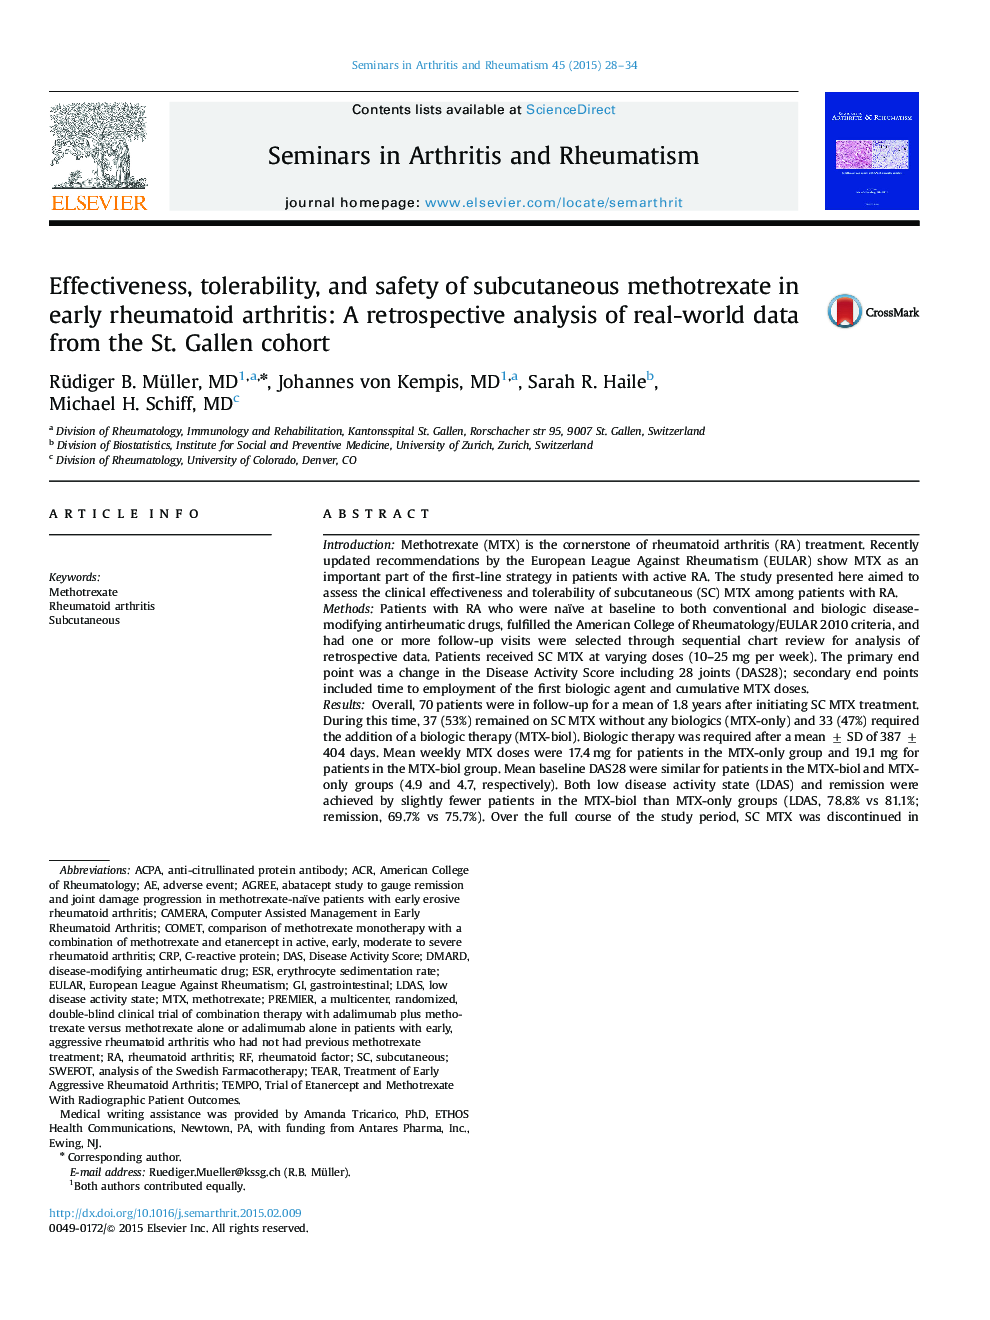 Effectiveness, tolerability, and safety of subcutaneous methotrexate in early rheumatoid arthritis: A retrospective analysis of real-world data from the St. Gallen cohort 